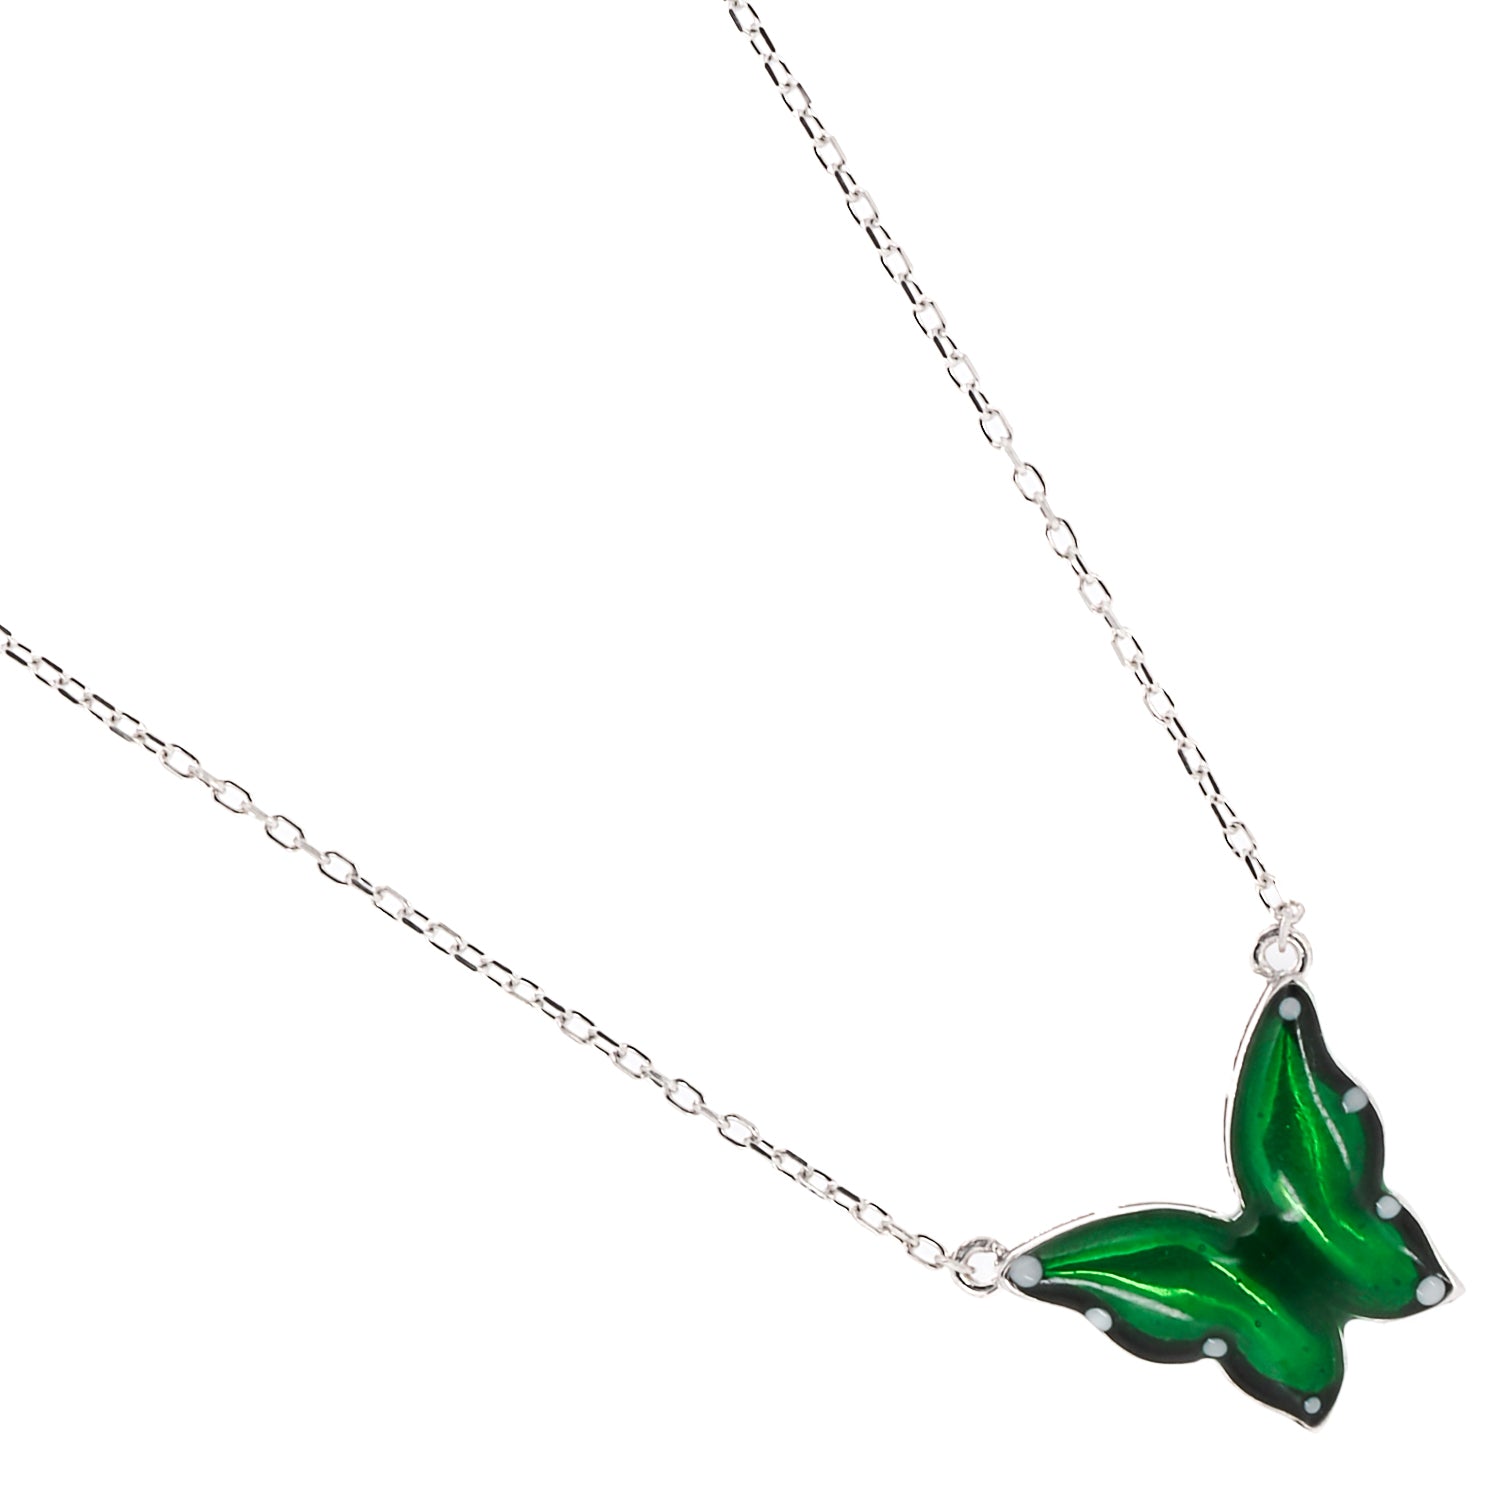 The enchanting butterfly pendant of the Silver Abundance Green Enamel Butterfly Necklace, symbolizing spiritual growth and renewal.